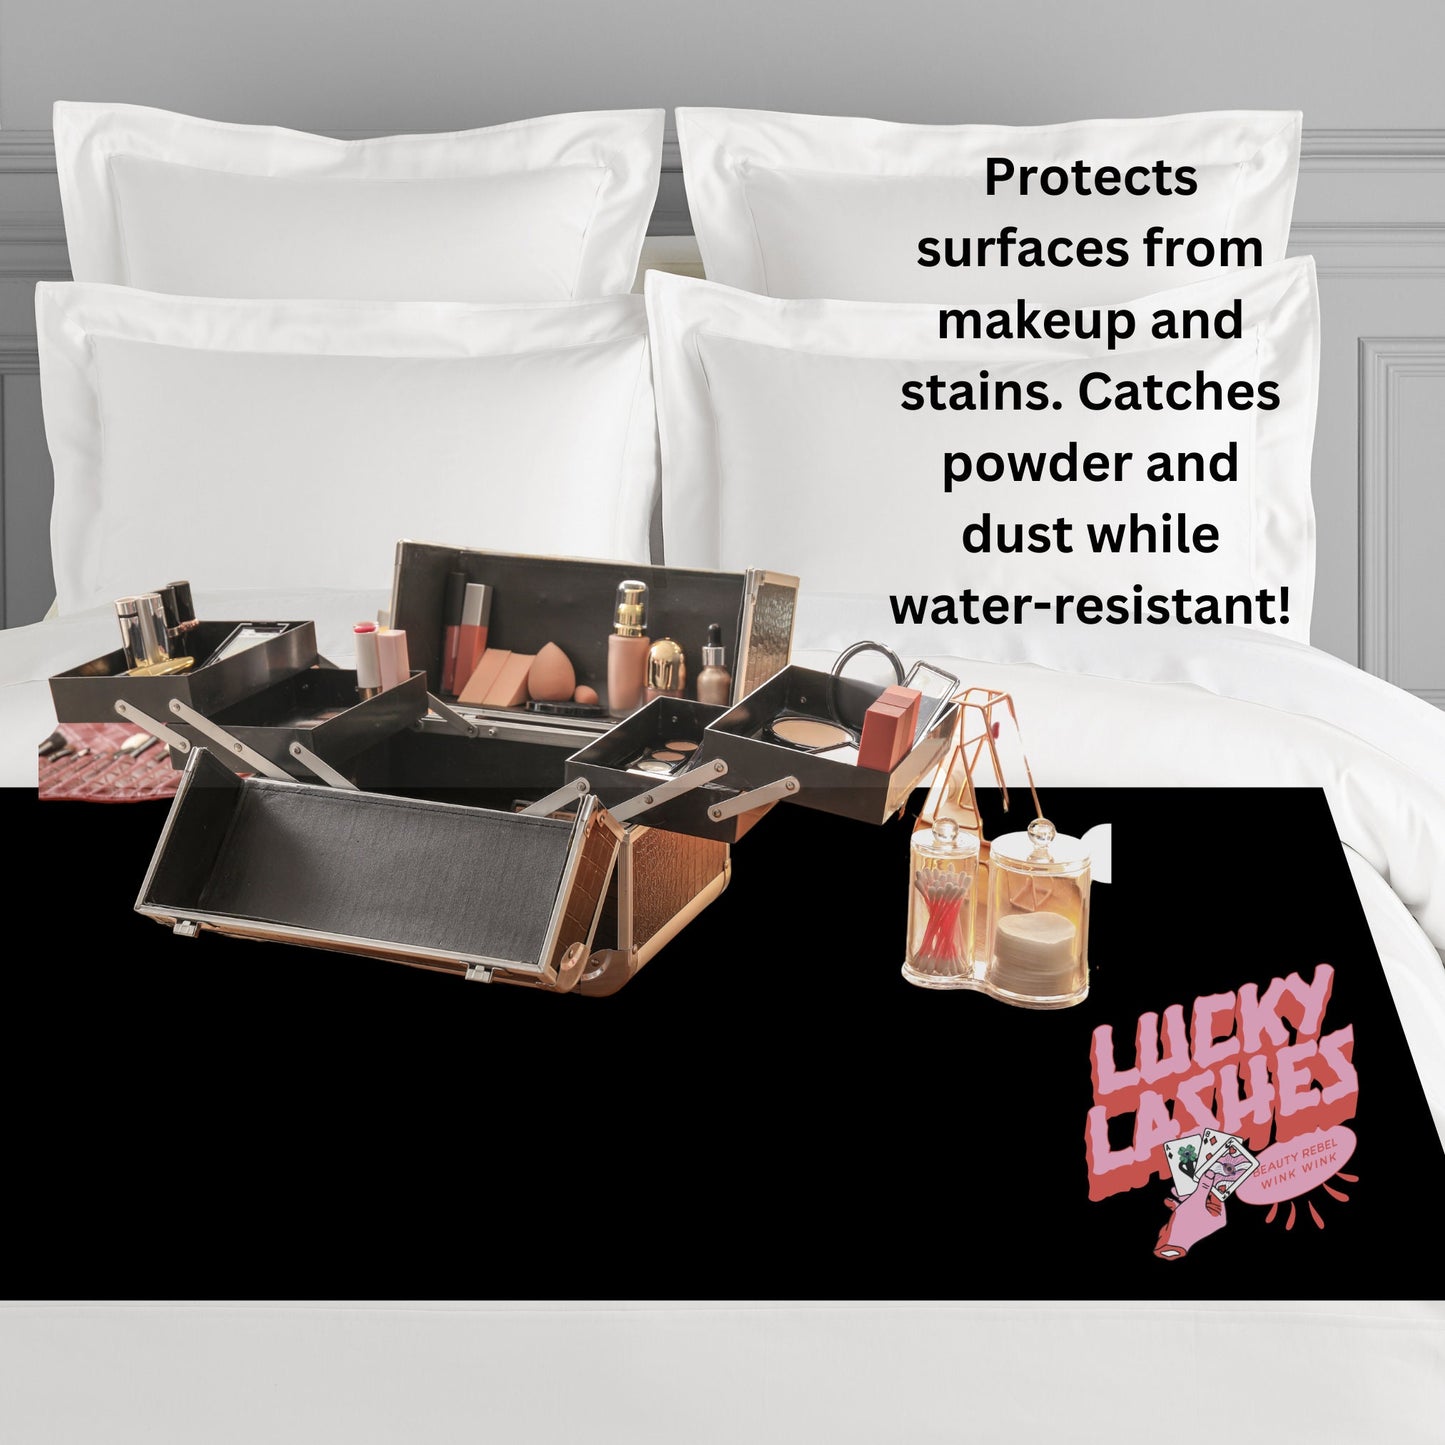 Makeup Artist Organizer Travel Layout Protection Pad, Freelance MUA Kit Tool, Water-Resistant Blanket, Protect Surfaces from Makeup